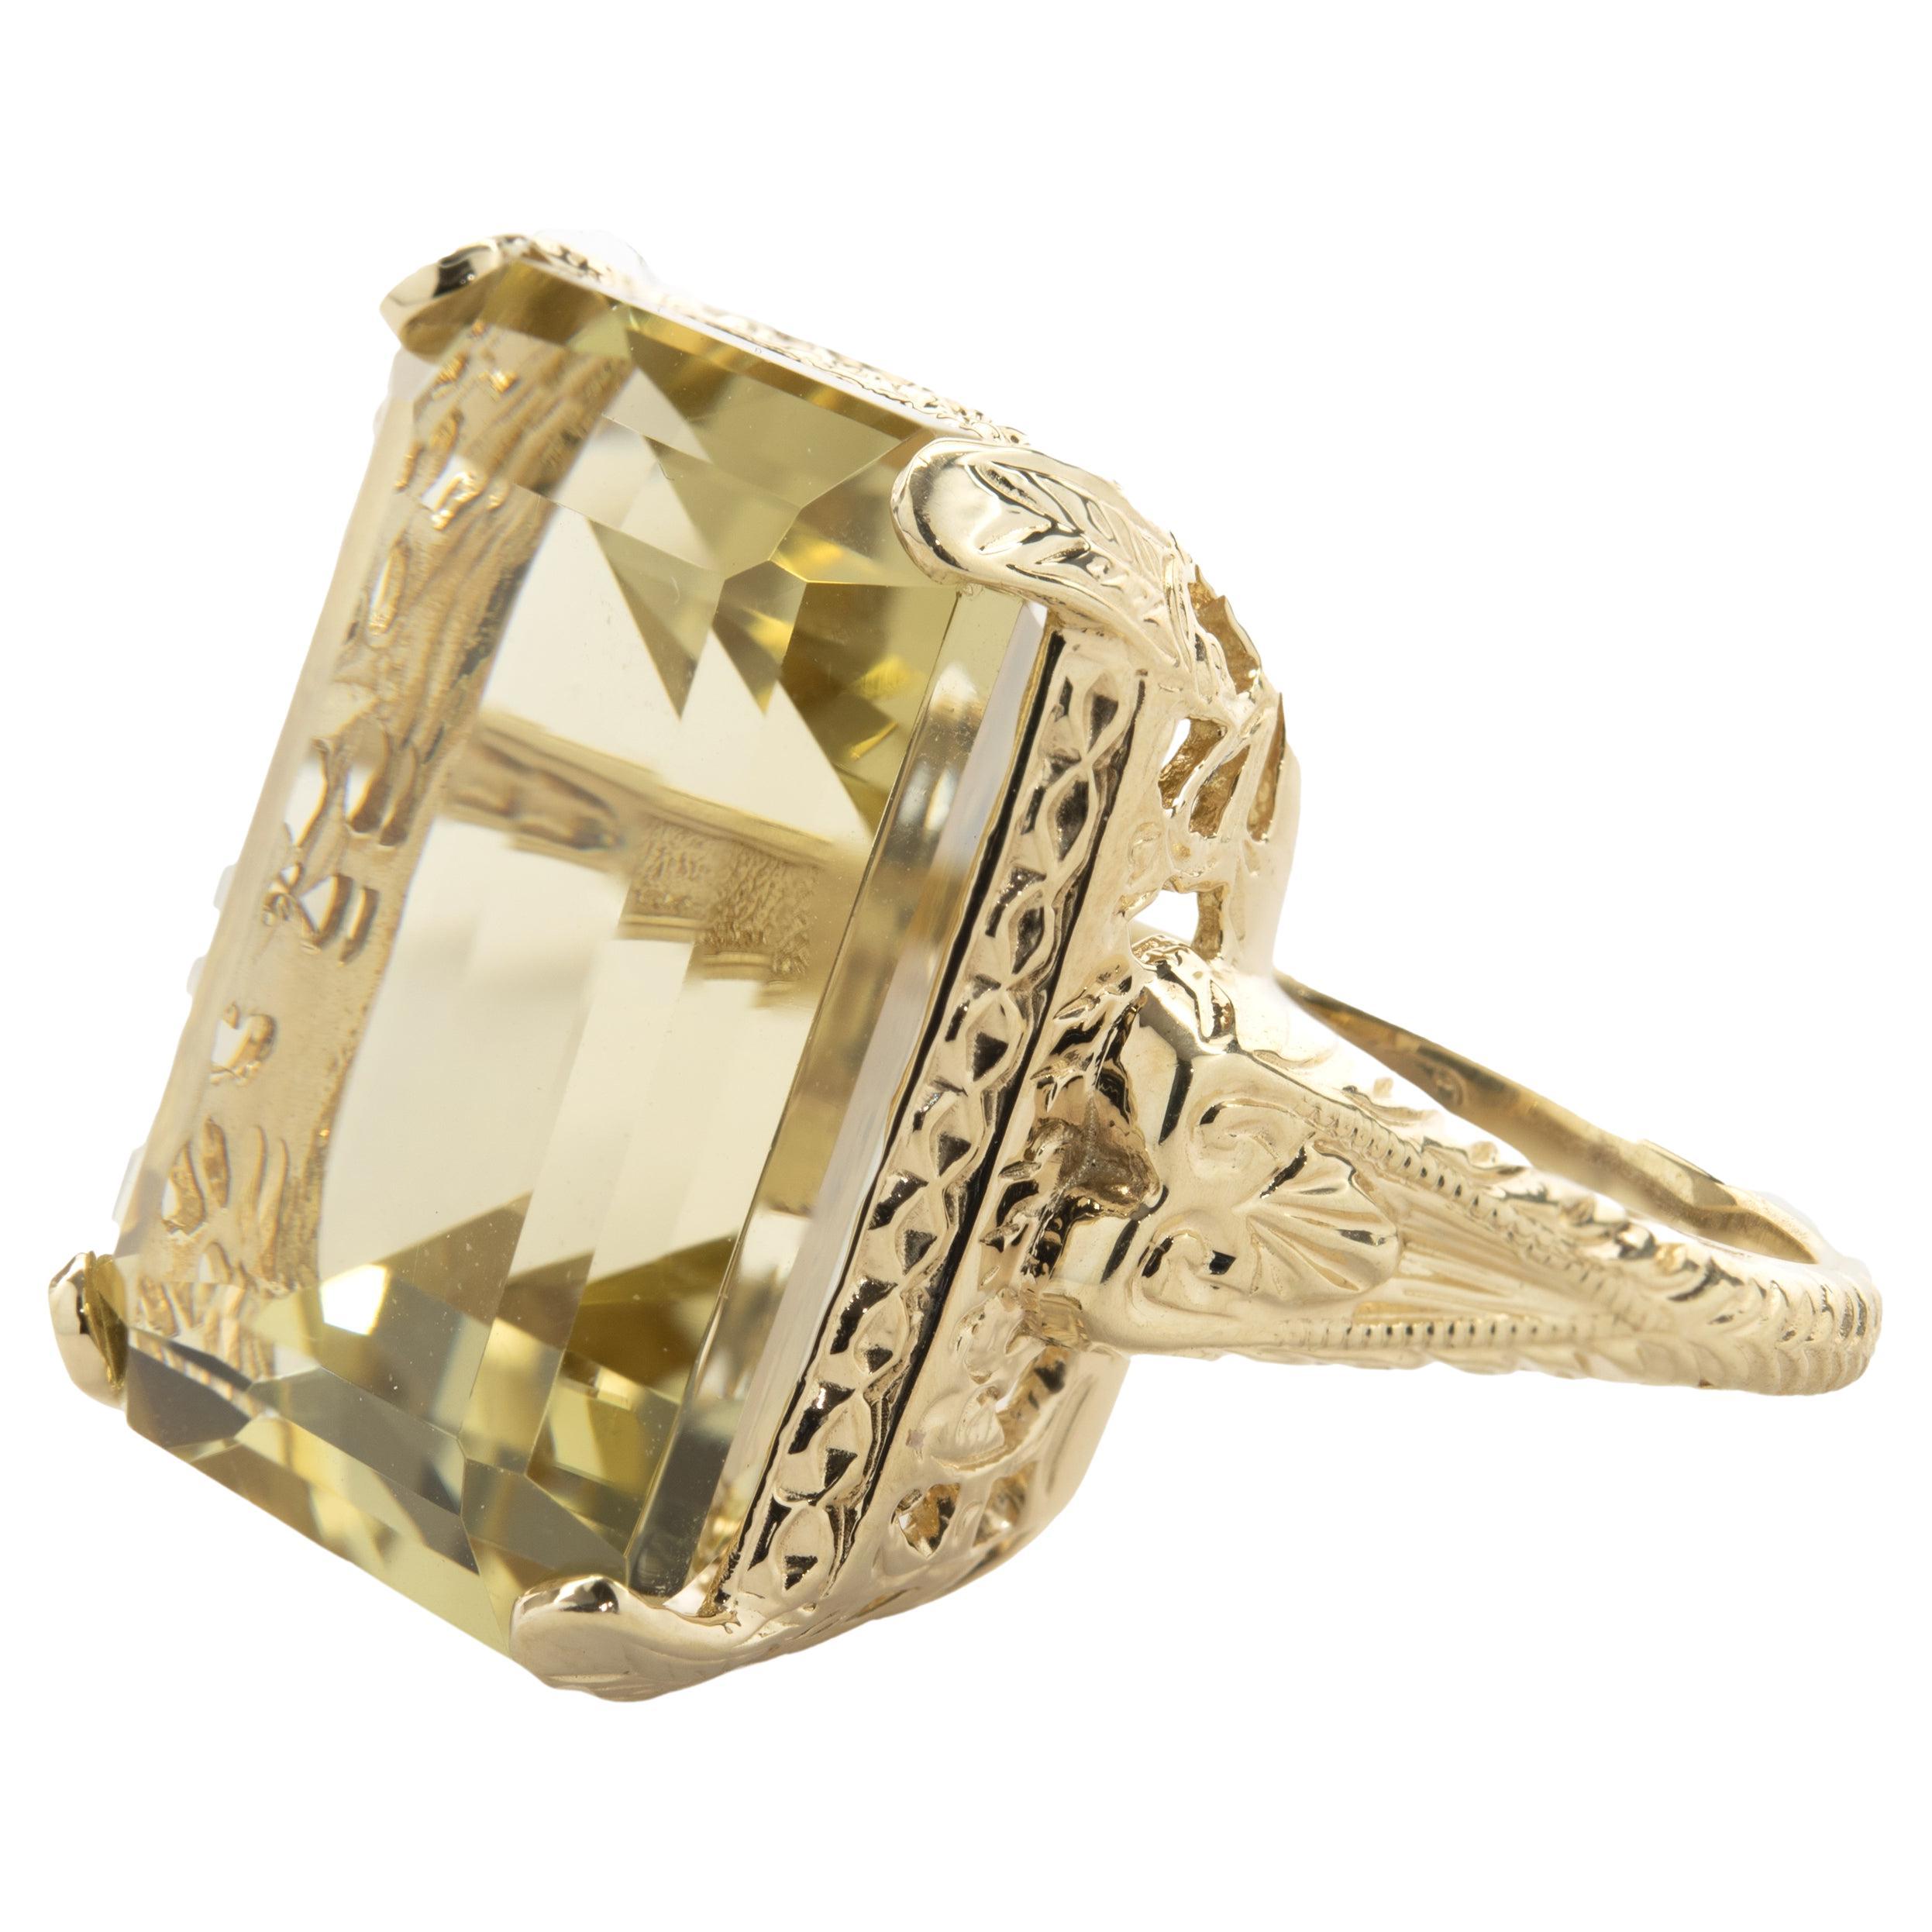 Designer: custom
Material: 10K yellow gold
Dimensions: ring top measures 18.30mm
Ring Size: 7.25 (complimentary sizing available)
Weight: 6.88 grams